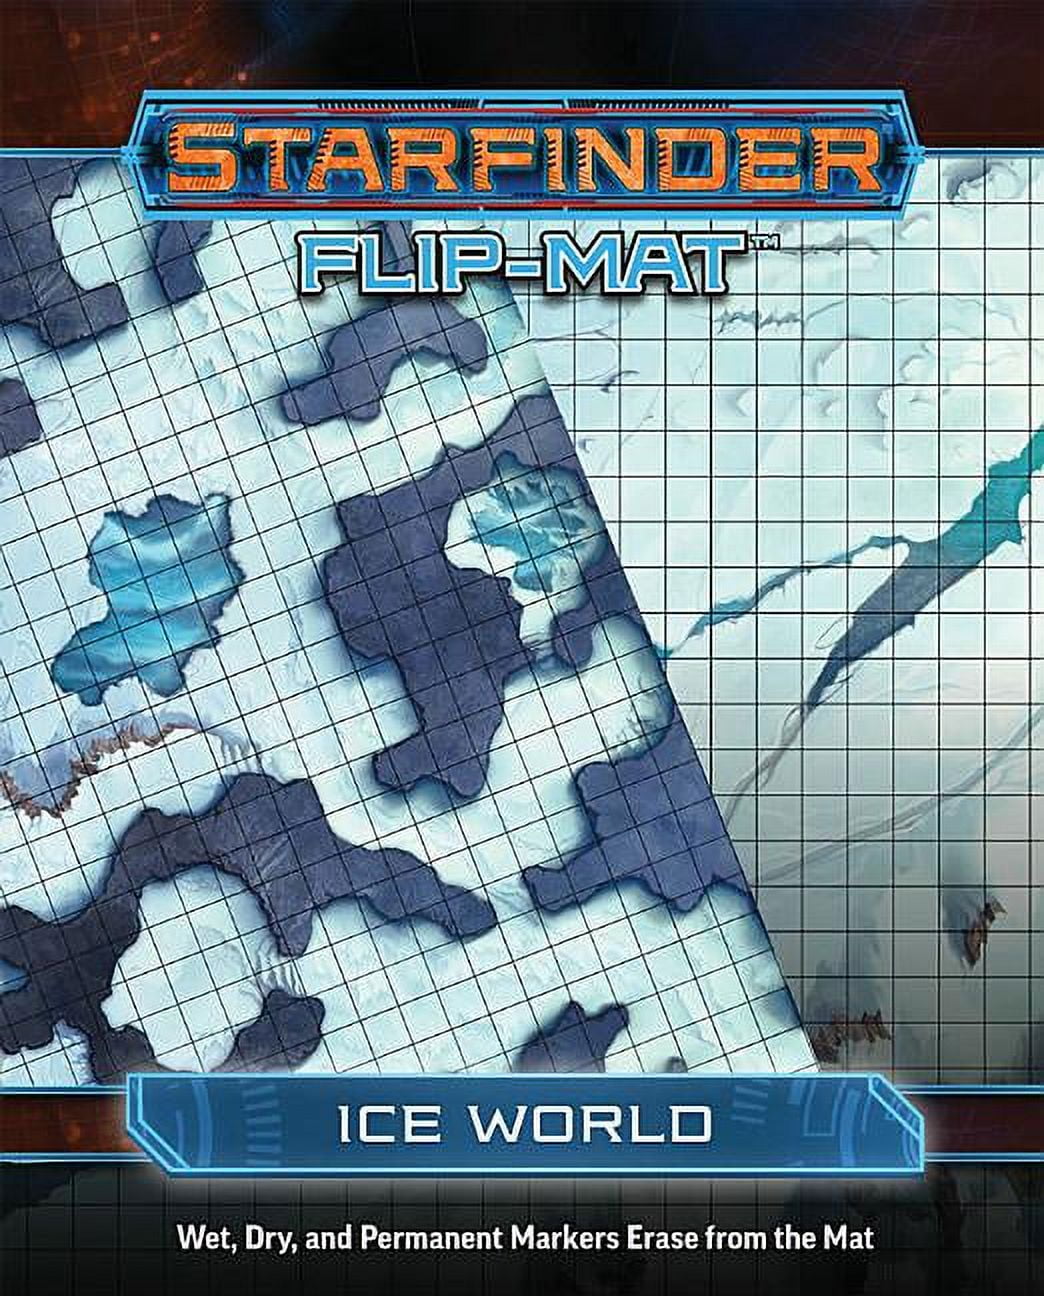 Pzo7314 Starfinder Flip-mat Ice World Role Playing Game